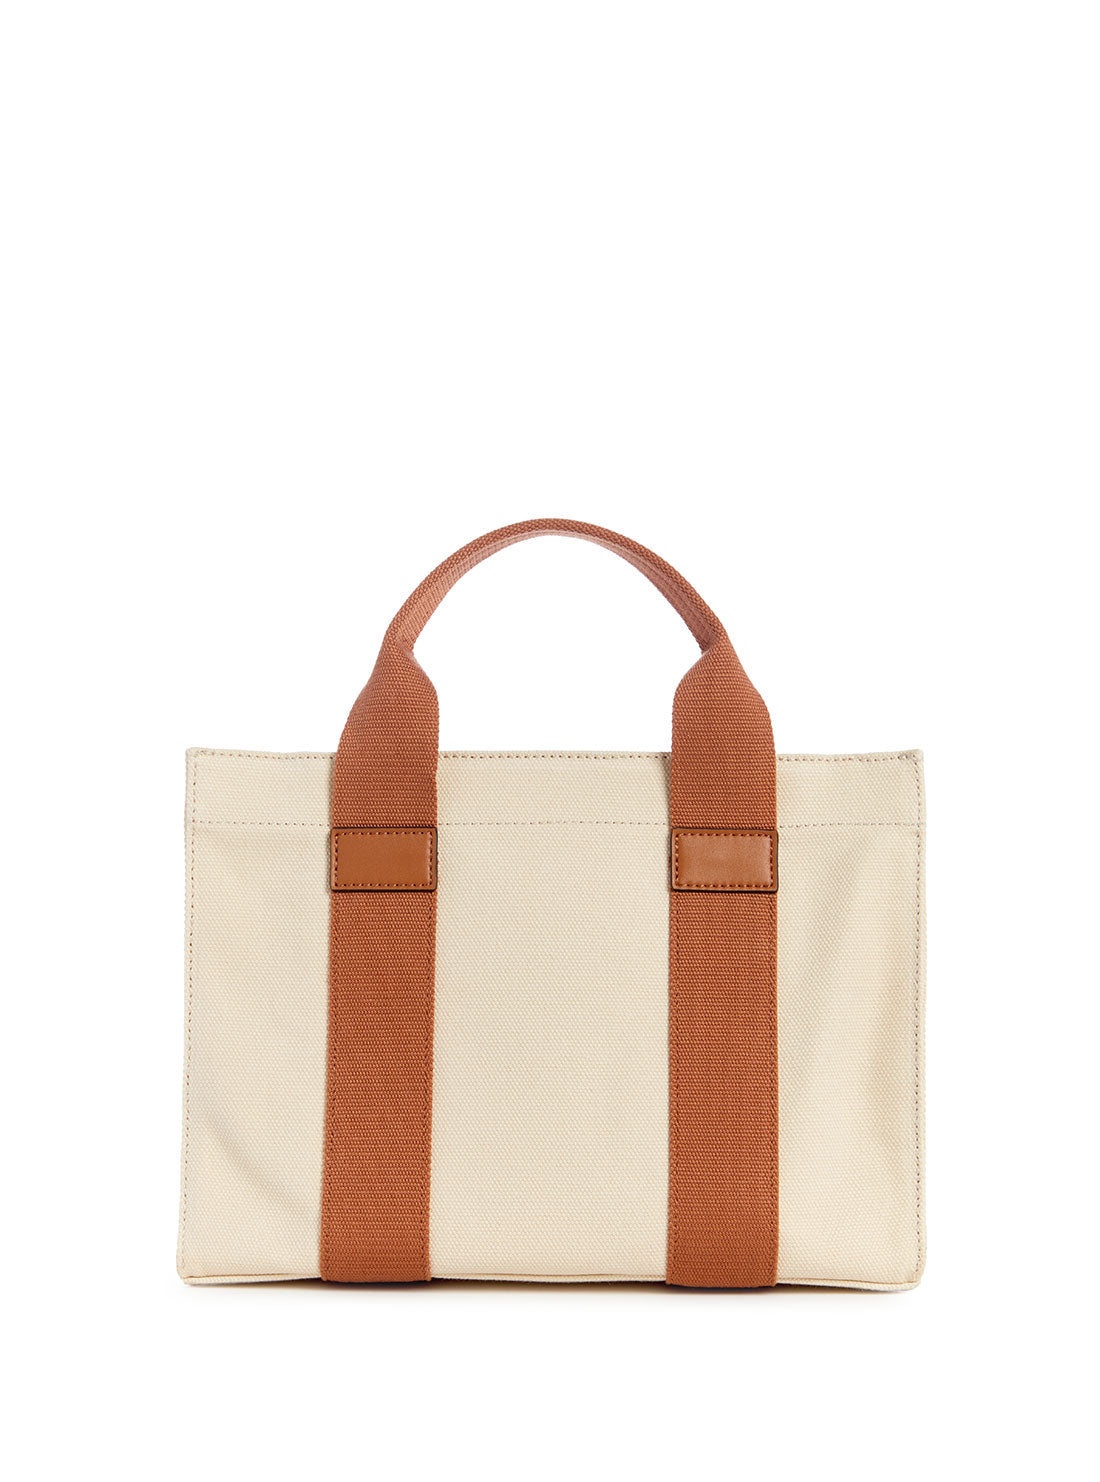 GUESS Beige Brown Canvas Small Tote Bag back view